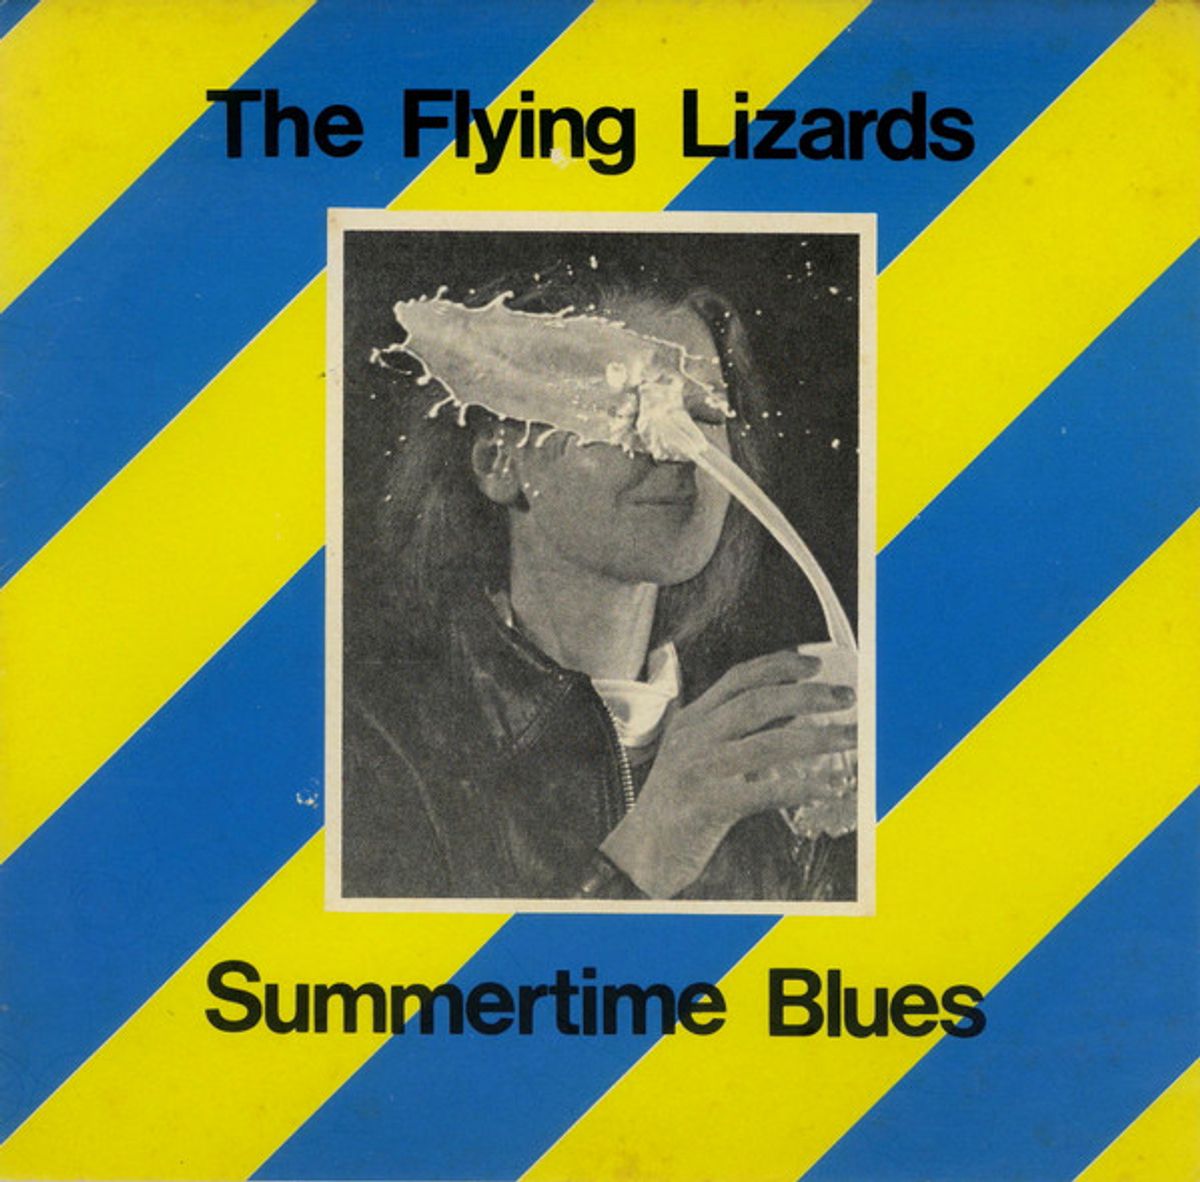 #NewWaveCovers - The Flying Lizards - Summertime Blues (1979)